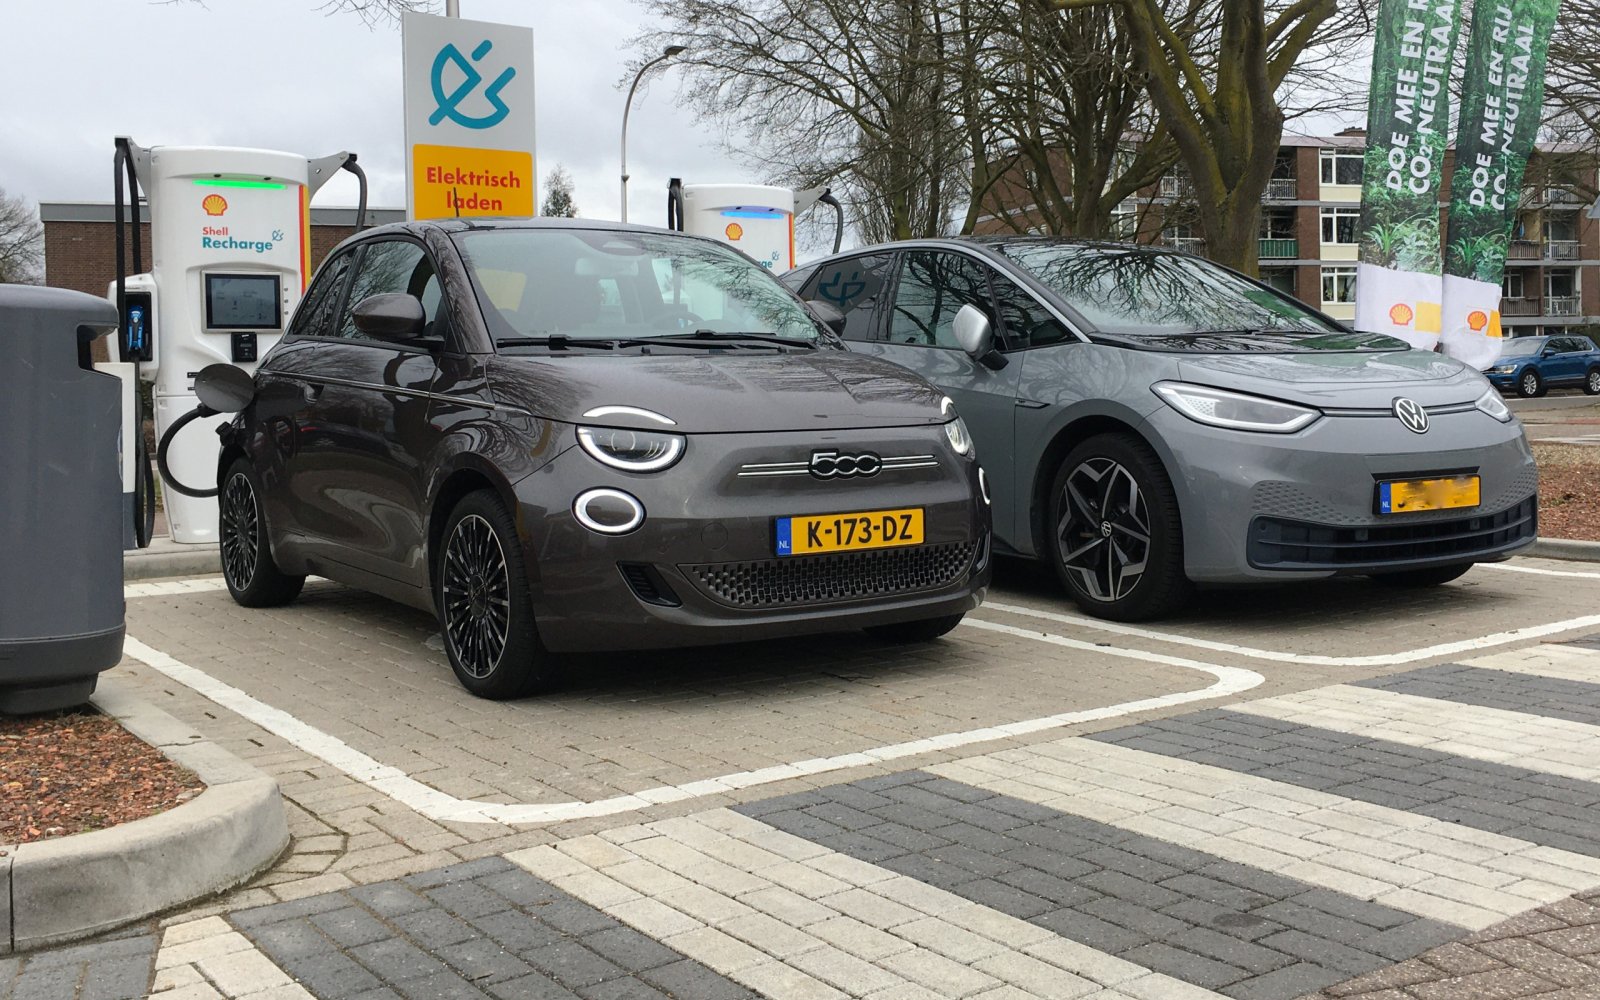 Top 20 - These electric cars came the furthest in our range test